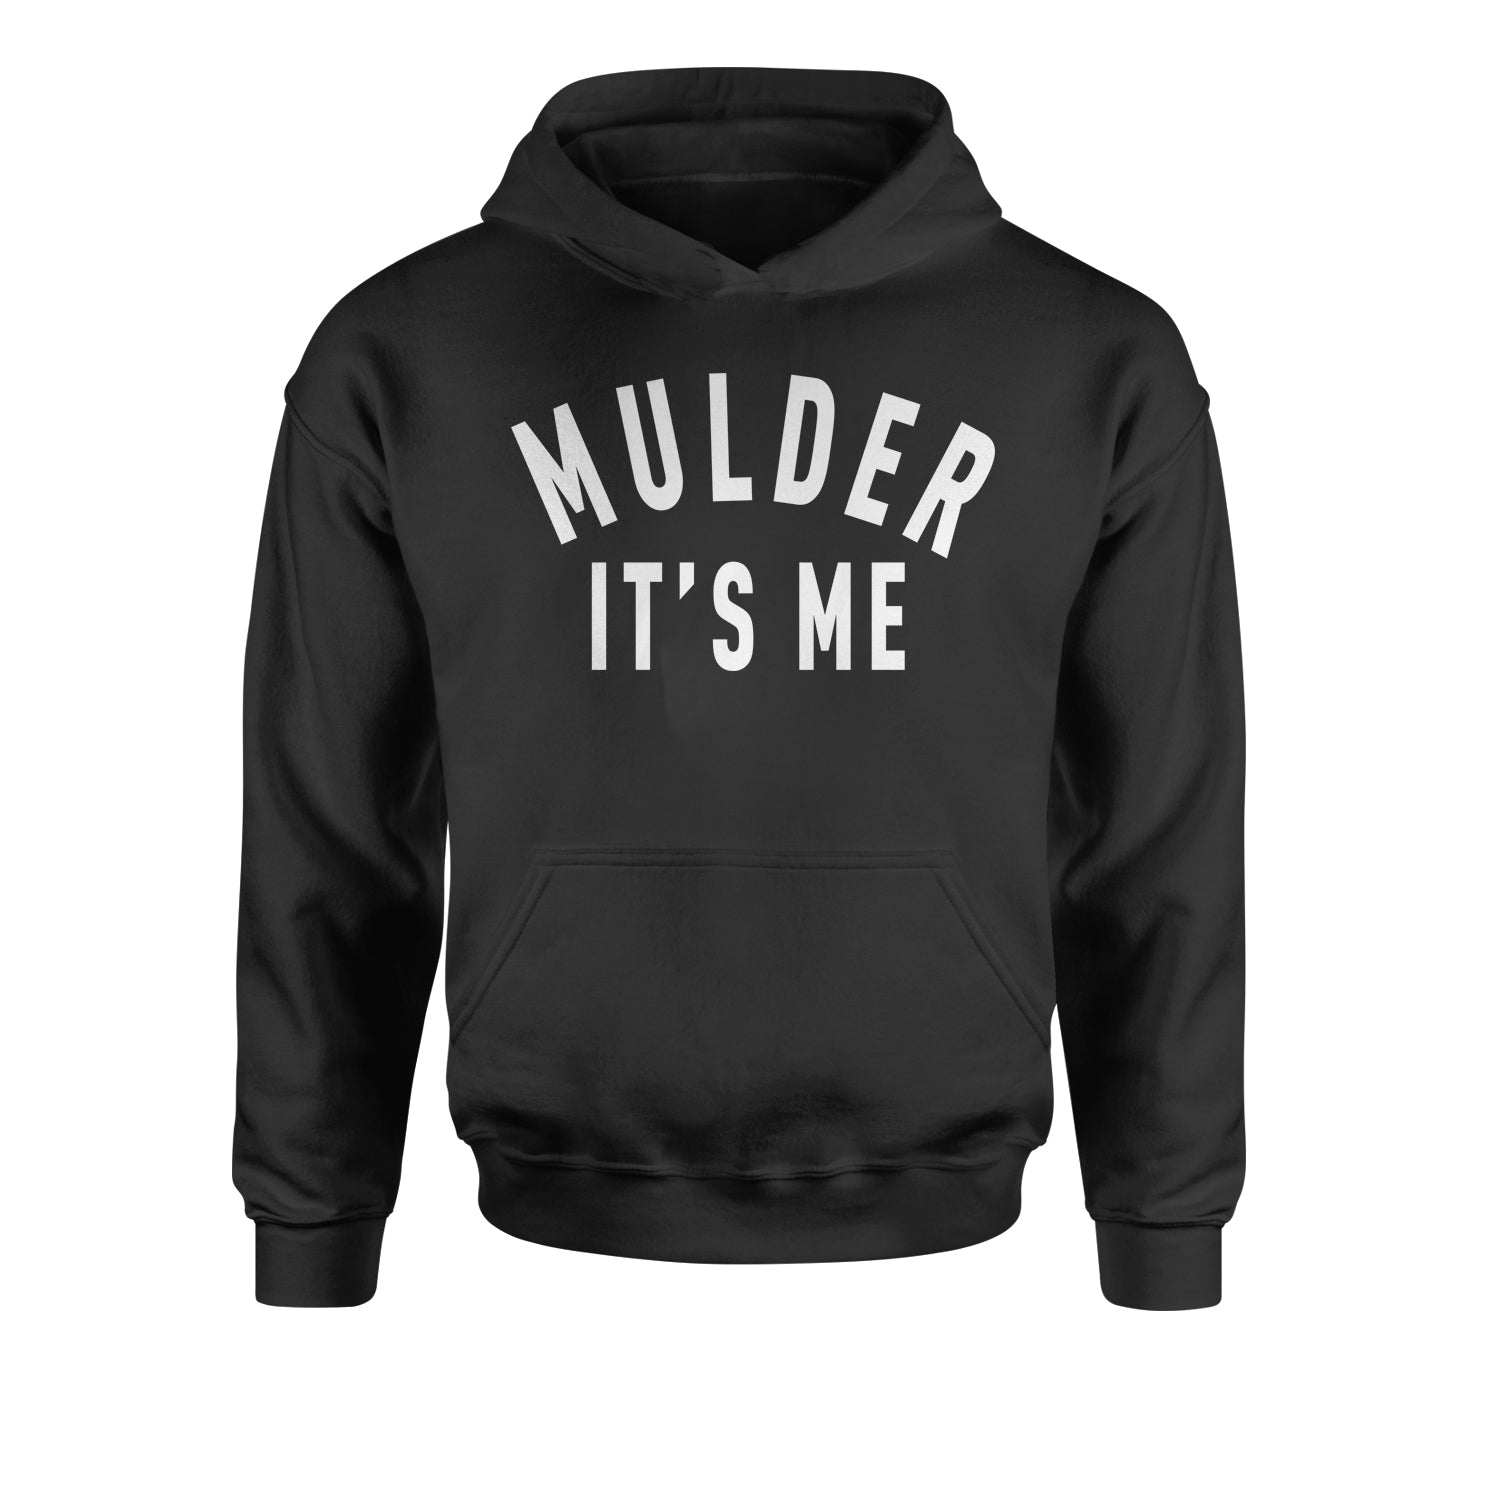 Mulder, It's Me Youth-Sized Hoodie 51, area, believe, files, is, mulder, out, scully, the, there, truth, x, xfiles by Expression Tees